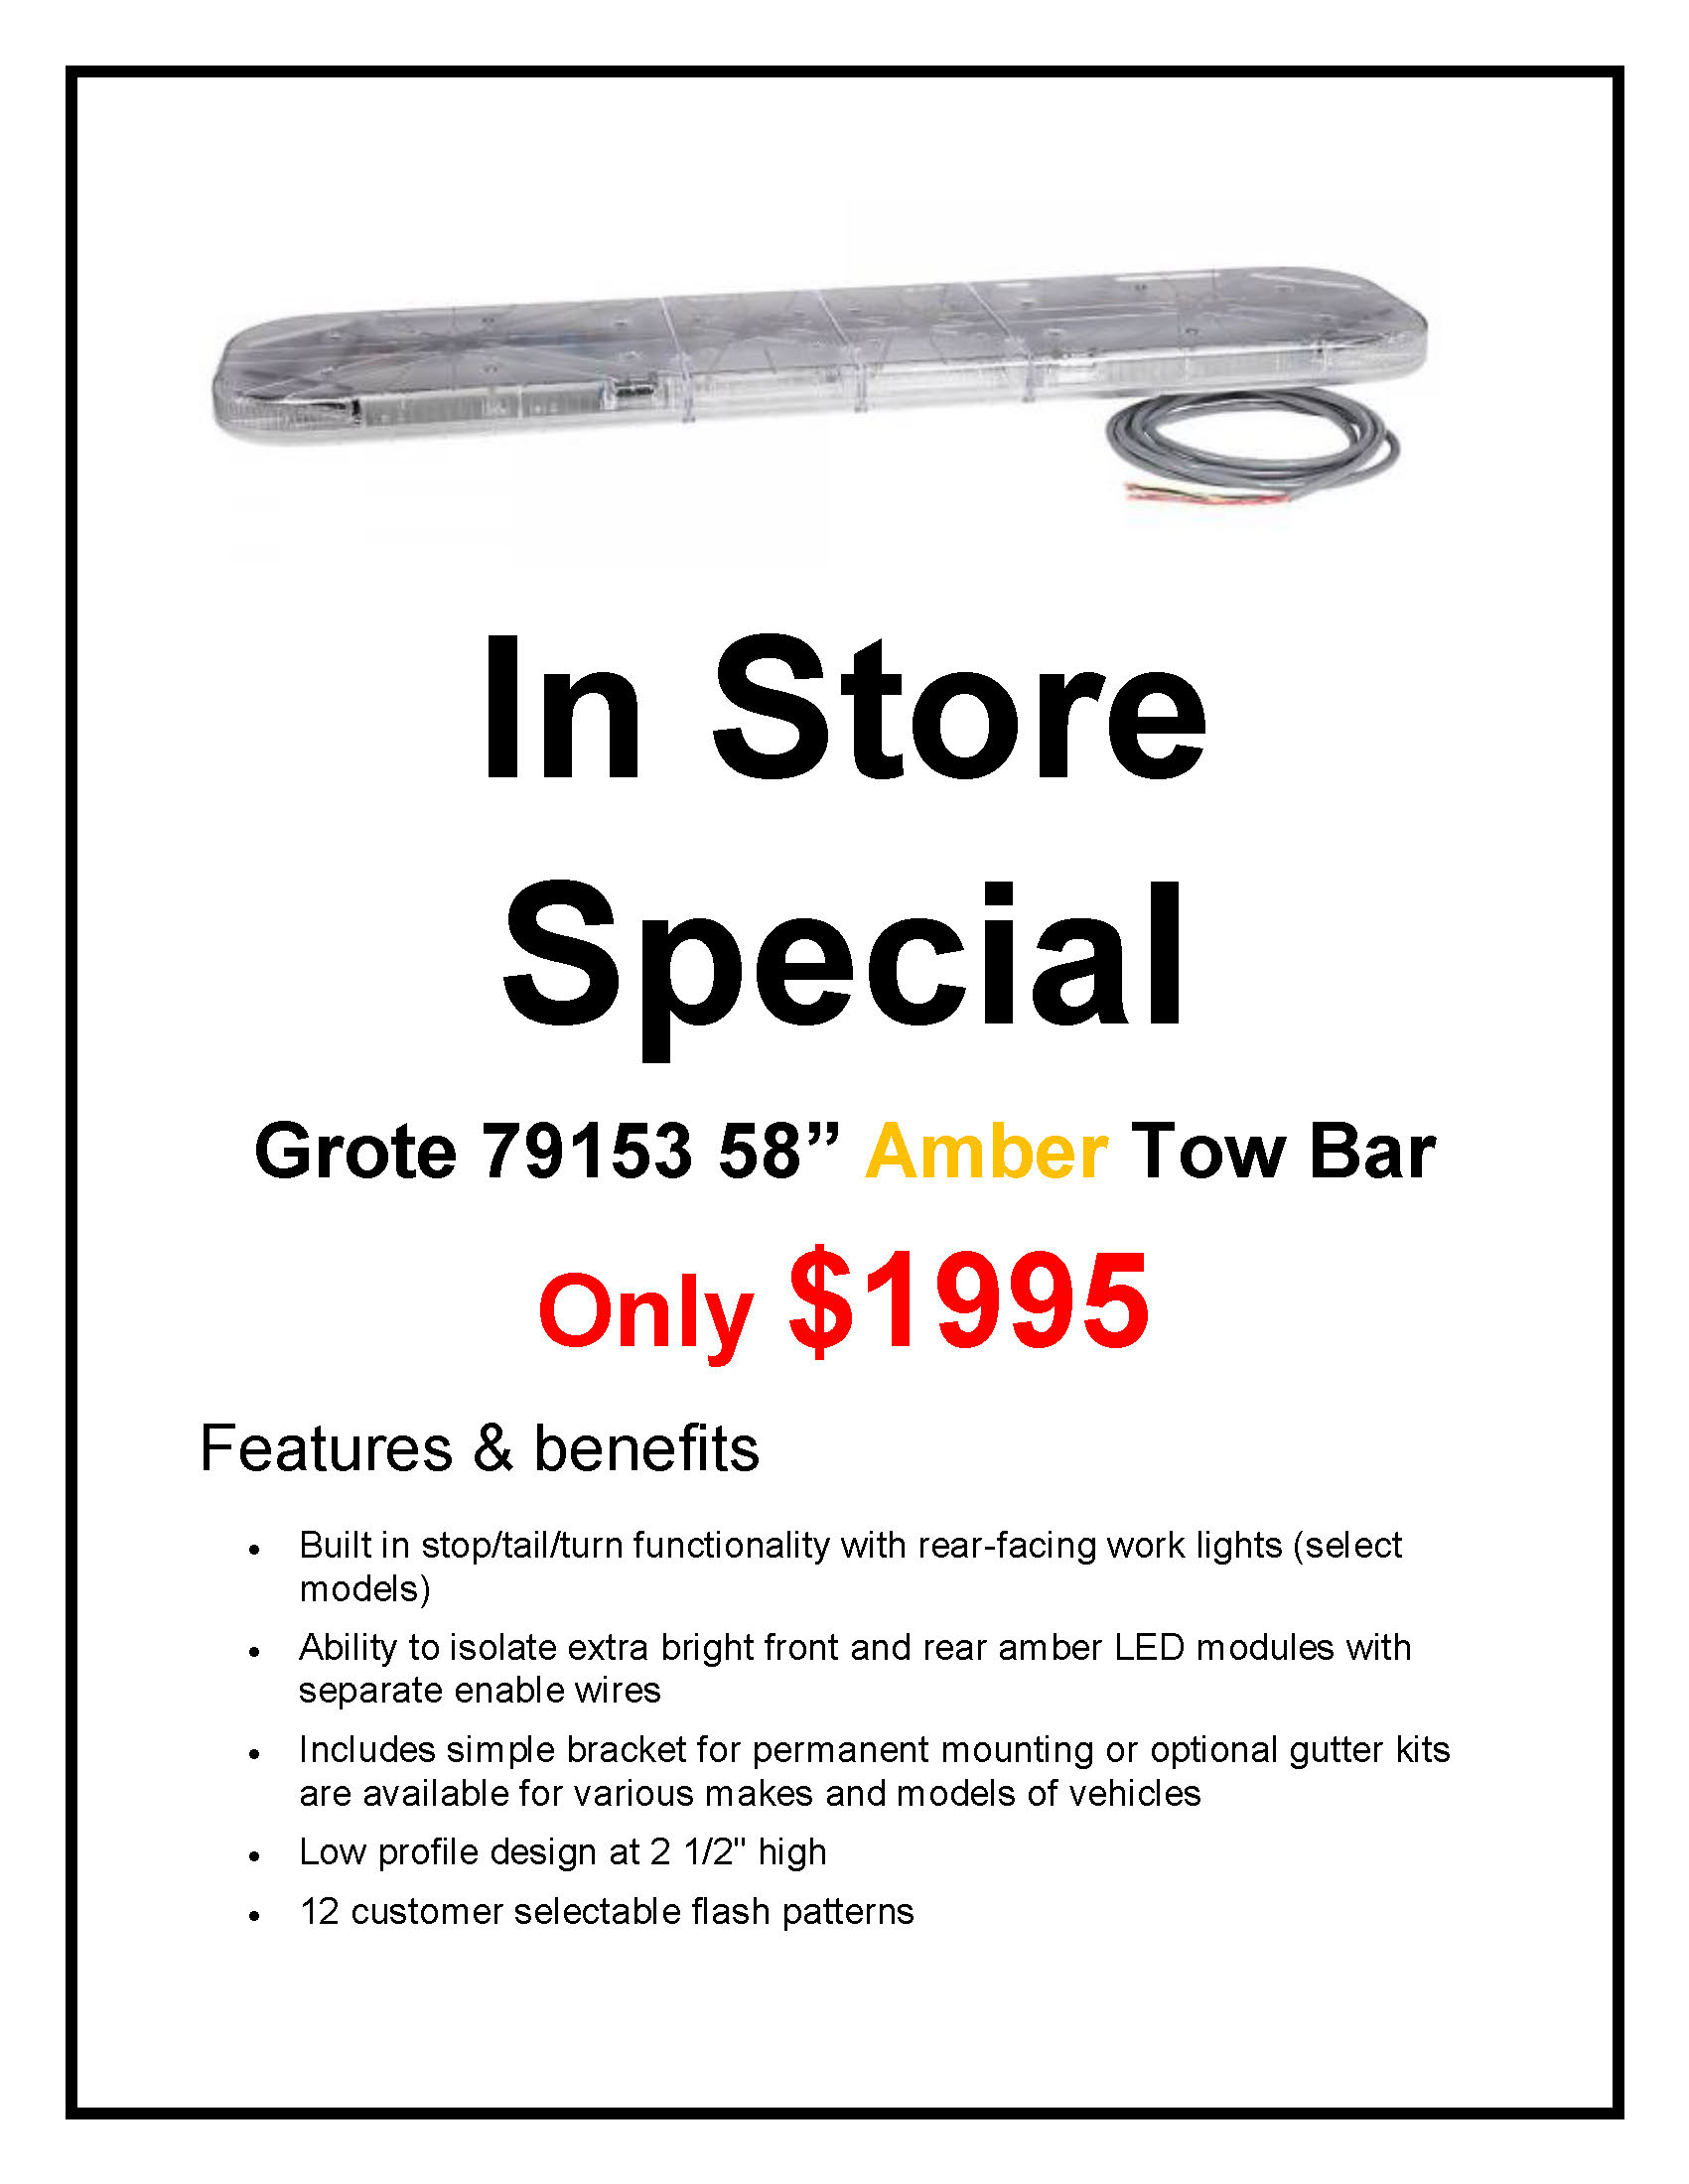 Grote - In Store Special Image